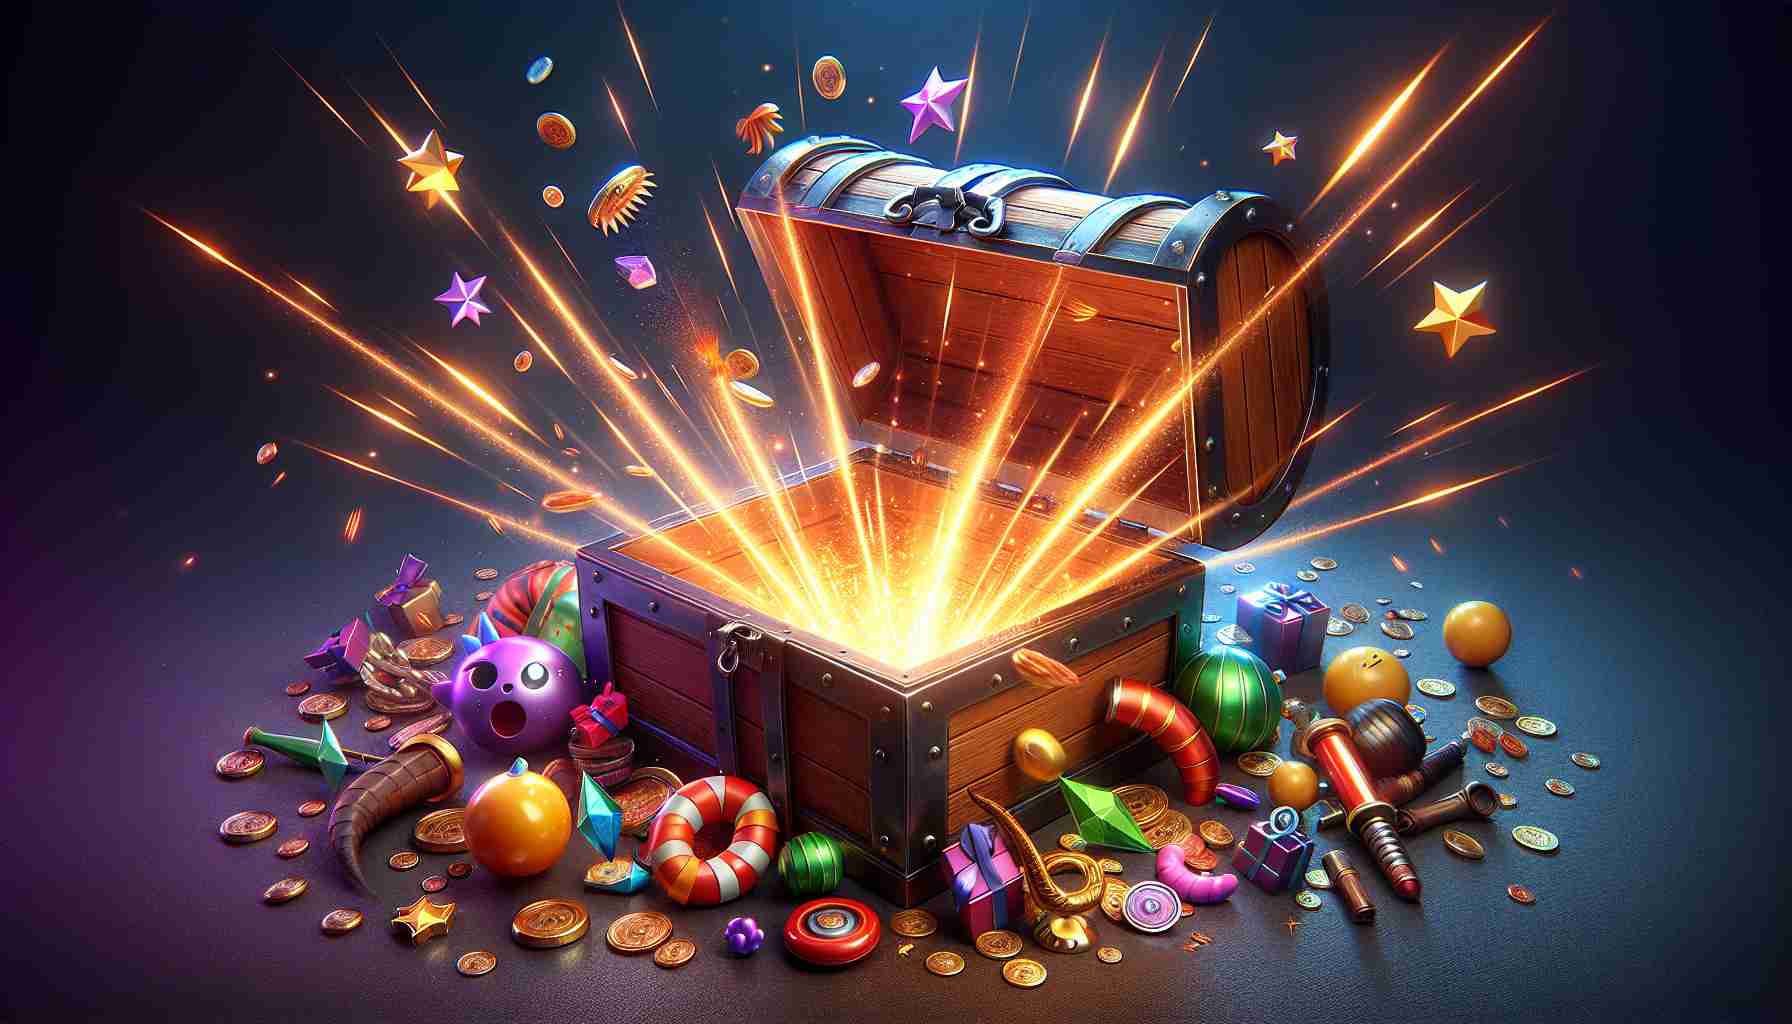 High-definition, hyper-realistic image of a virtual treasure chest bursting open, revealing a variety of items that are typically found in a popular mobile monster-catching game. The scene exudes an atmosphere of excitement and anticipation, as though one is awaiting great rewards to enhance their gaming experience.